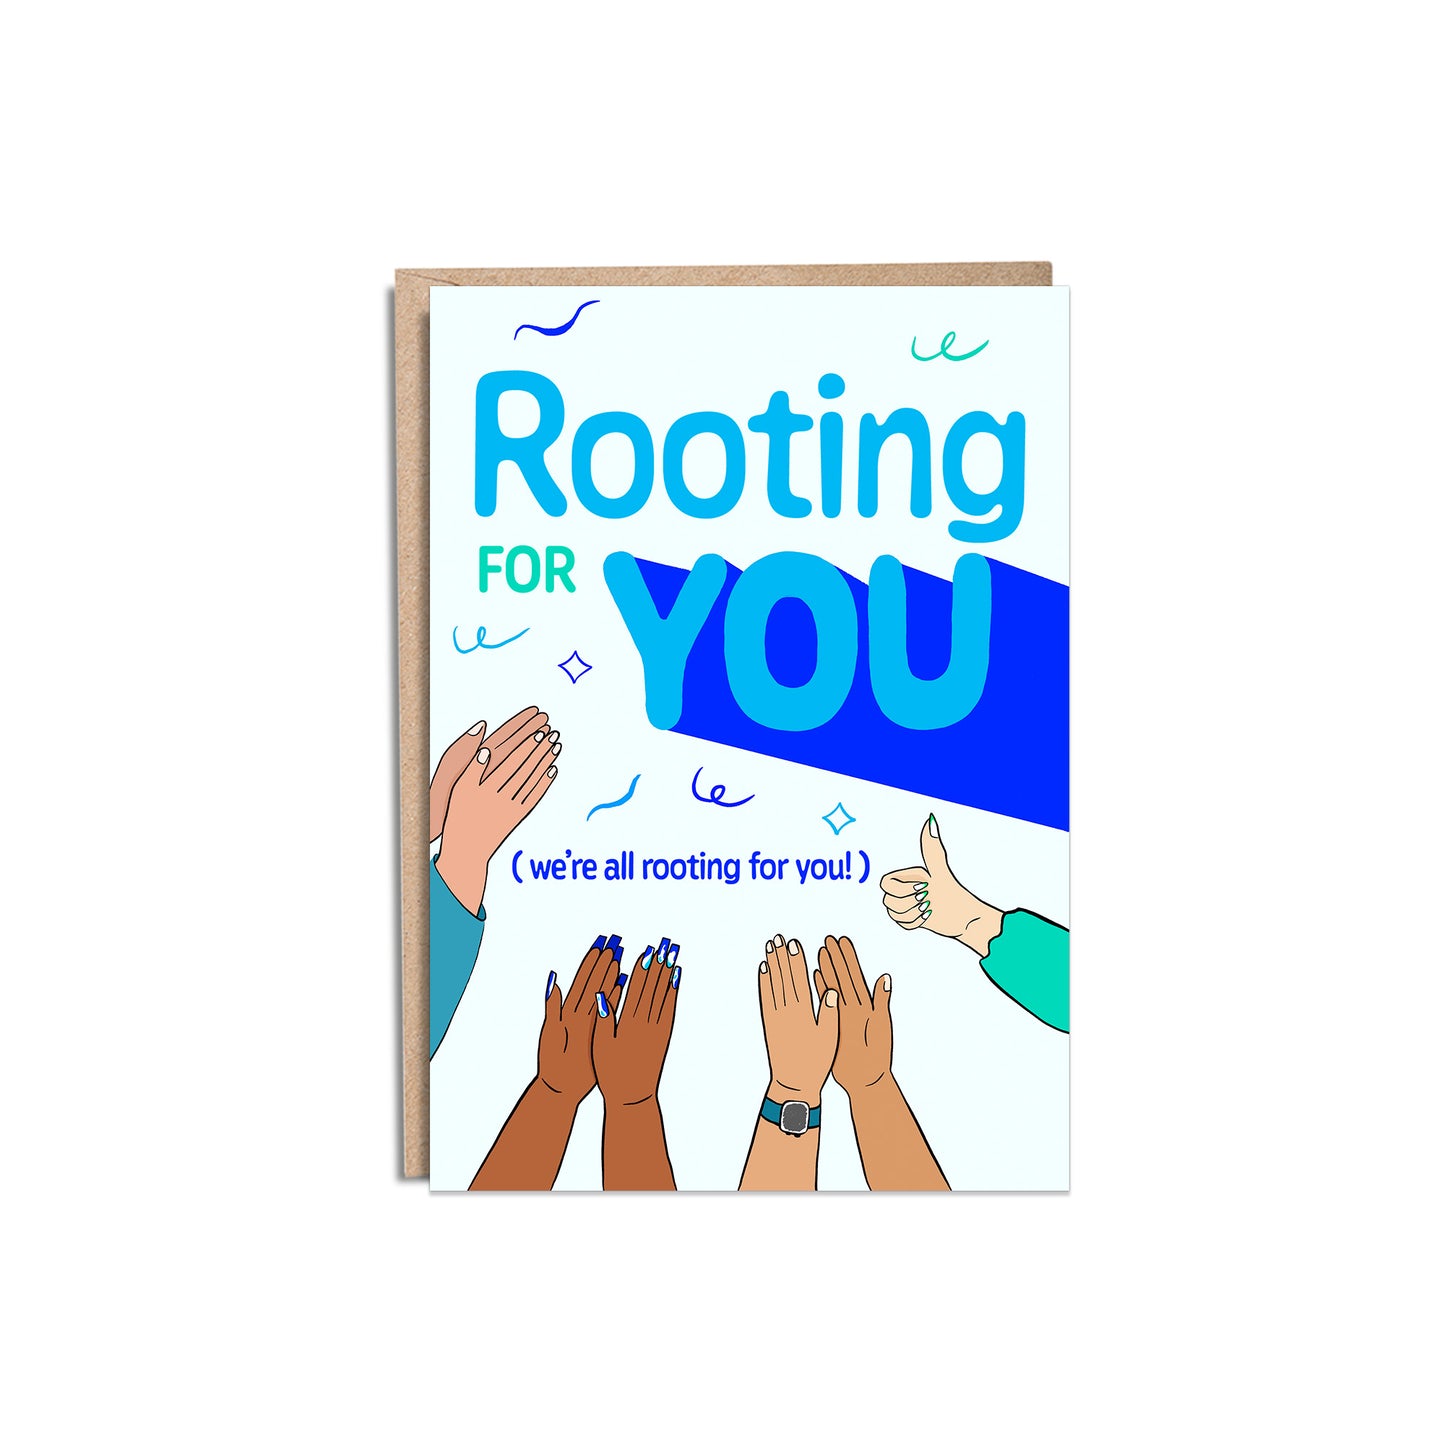 Rooting For You 5x7”, Encouraging, celebrate, congratulations, achievement, big opportunity, greeting cards from Goods Made By Digitrillnana, Ashley Fletcher. Black Woman Owned. Perfect card to cheer on or celebrate a friend!